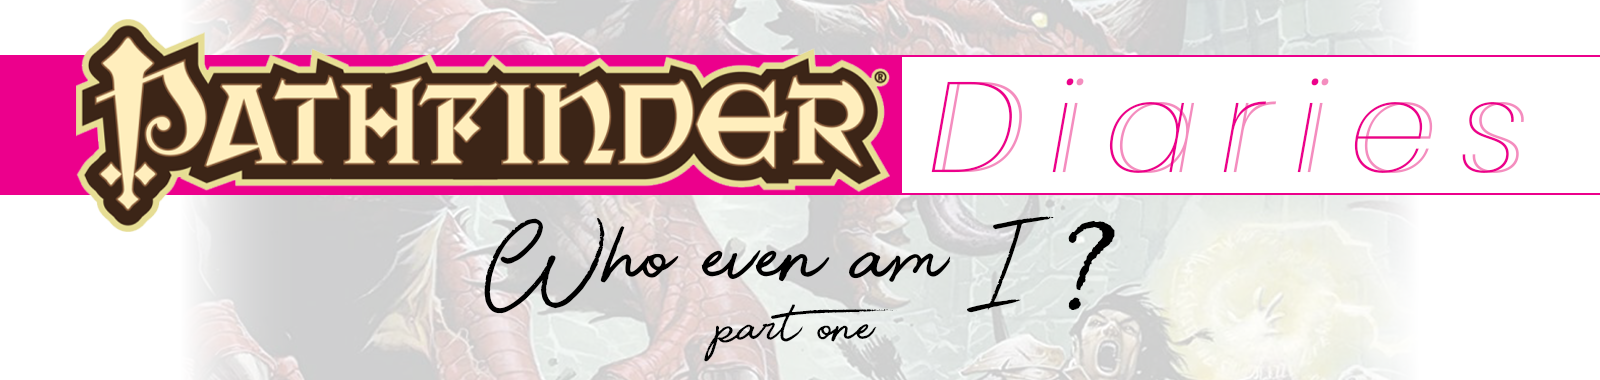 Pathfinder Diaries: Who Even Am I? - Part One